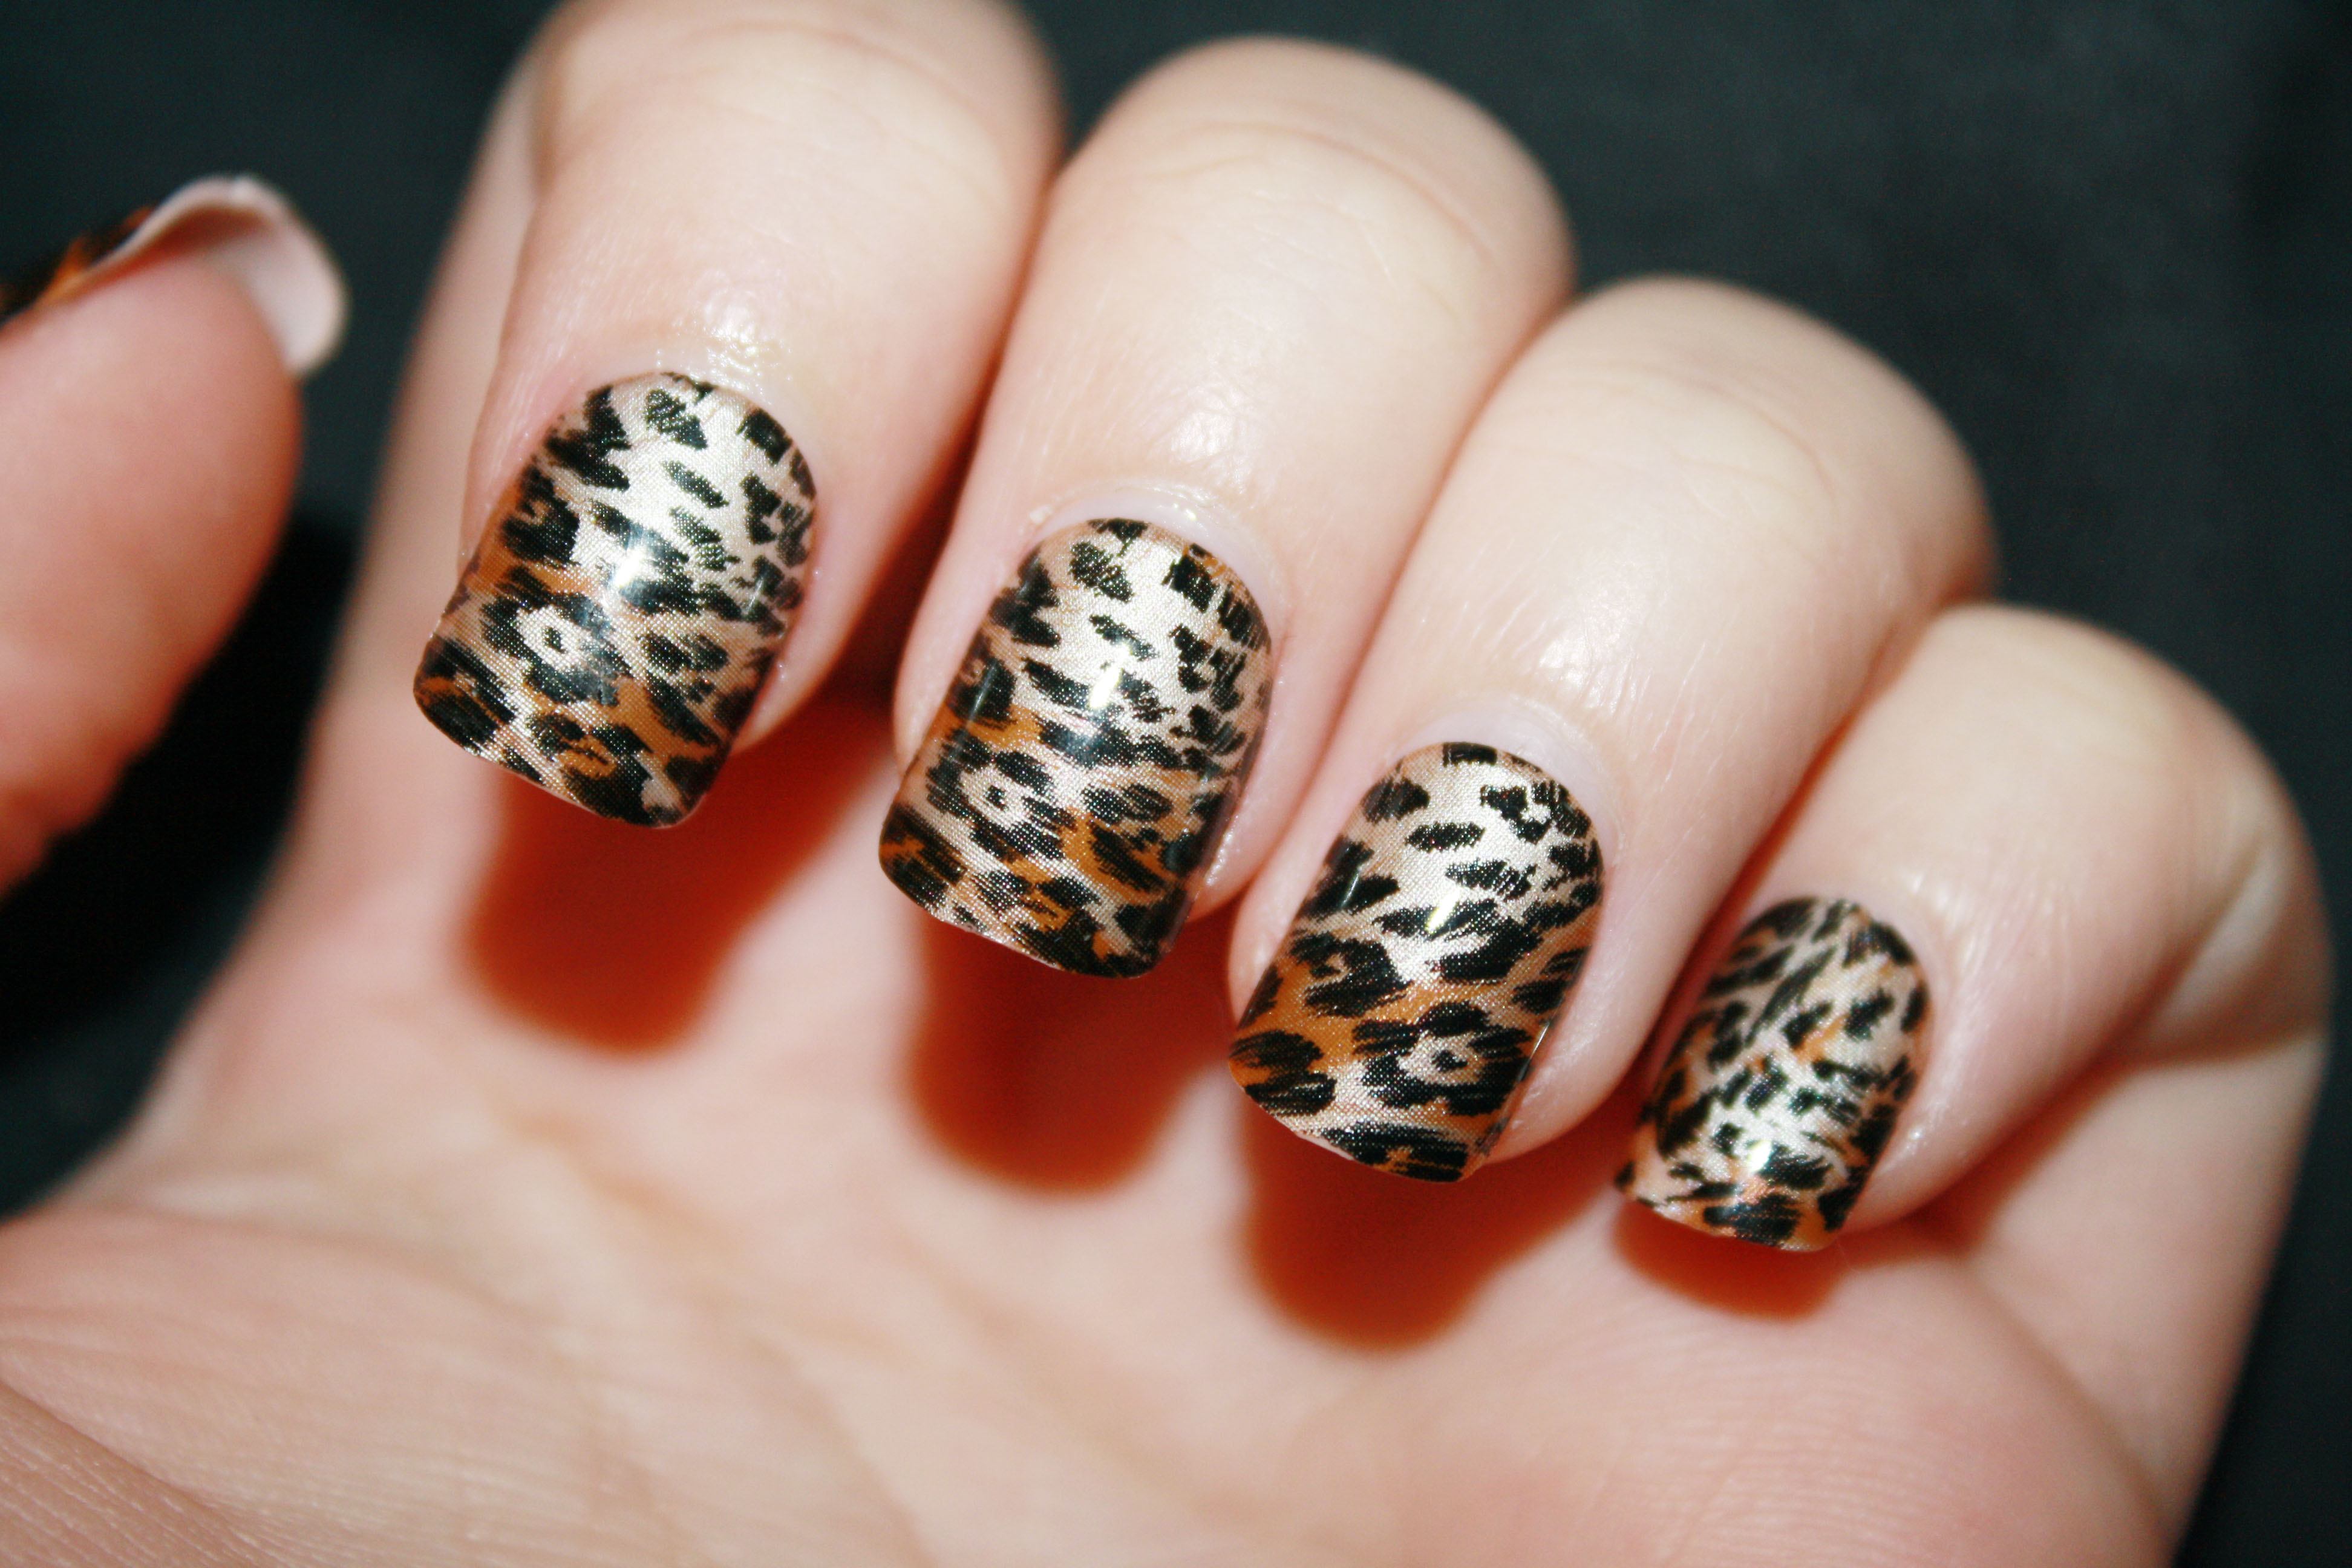 10. Chic and Playful Animal Print Nail Art Designs - wide 5